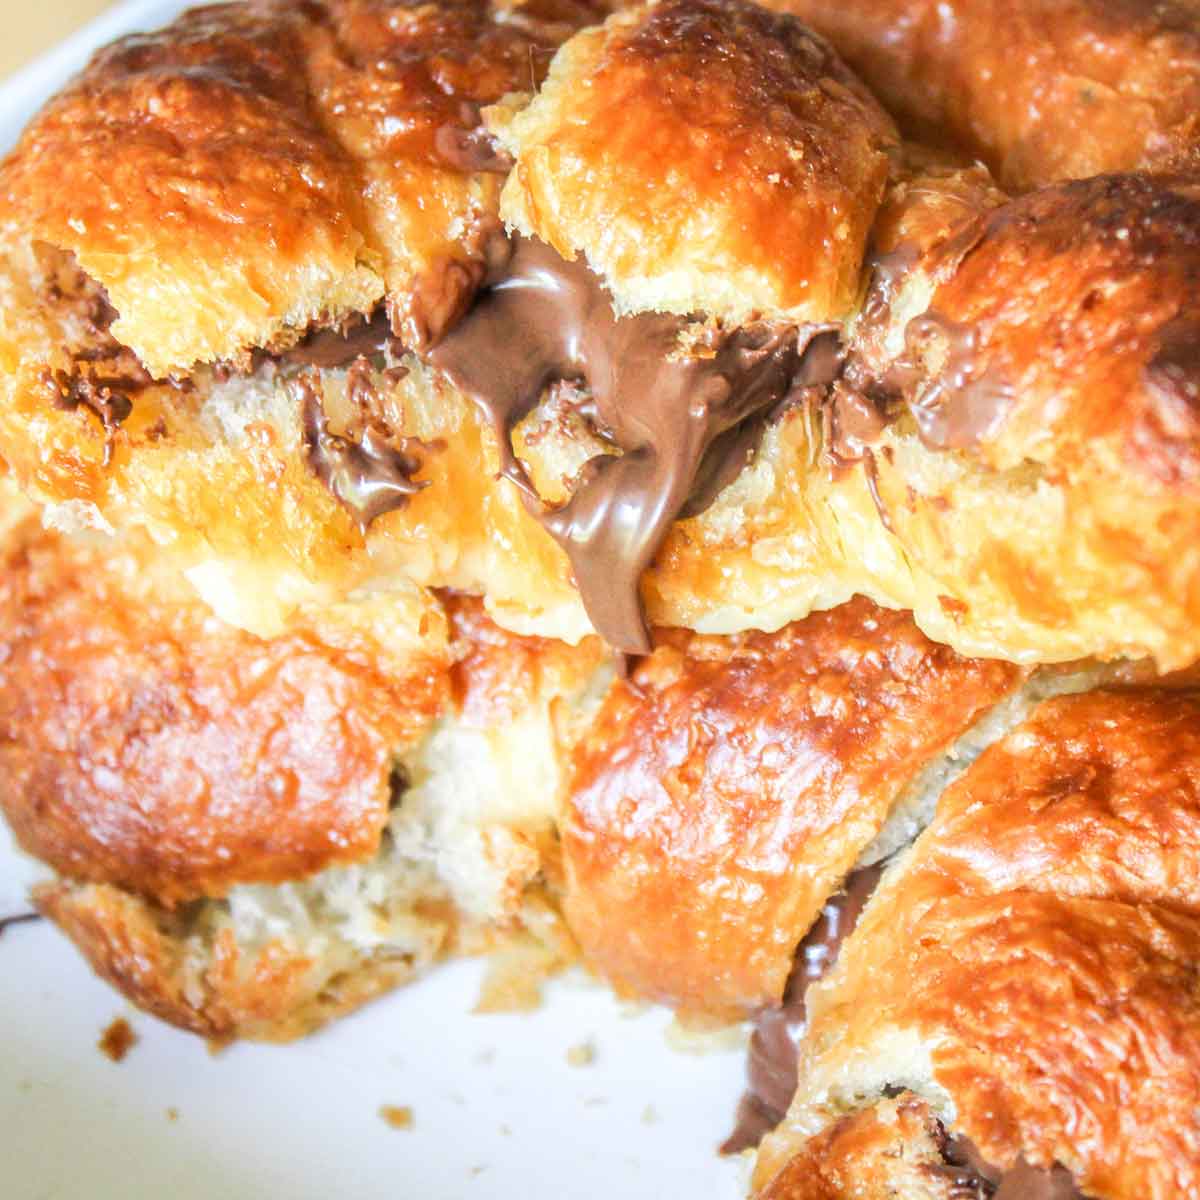 Freshly baked croissants with nutella on a white plate near